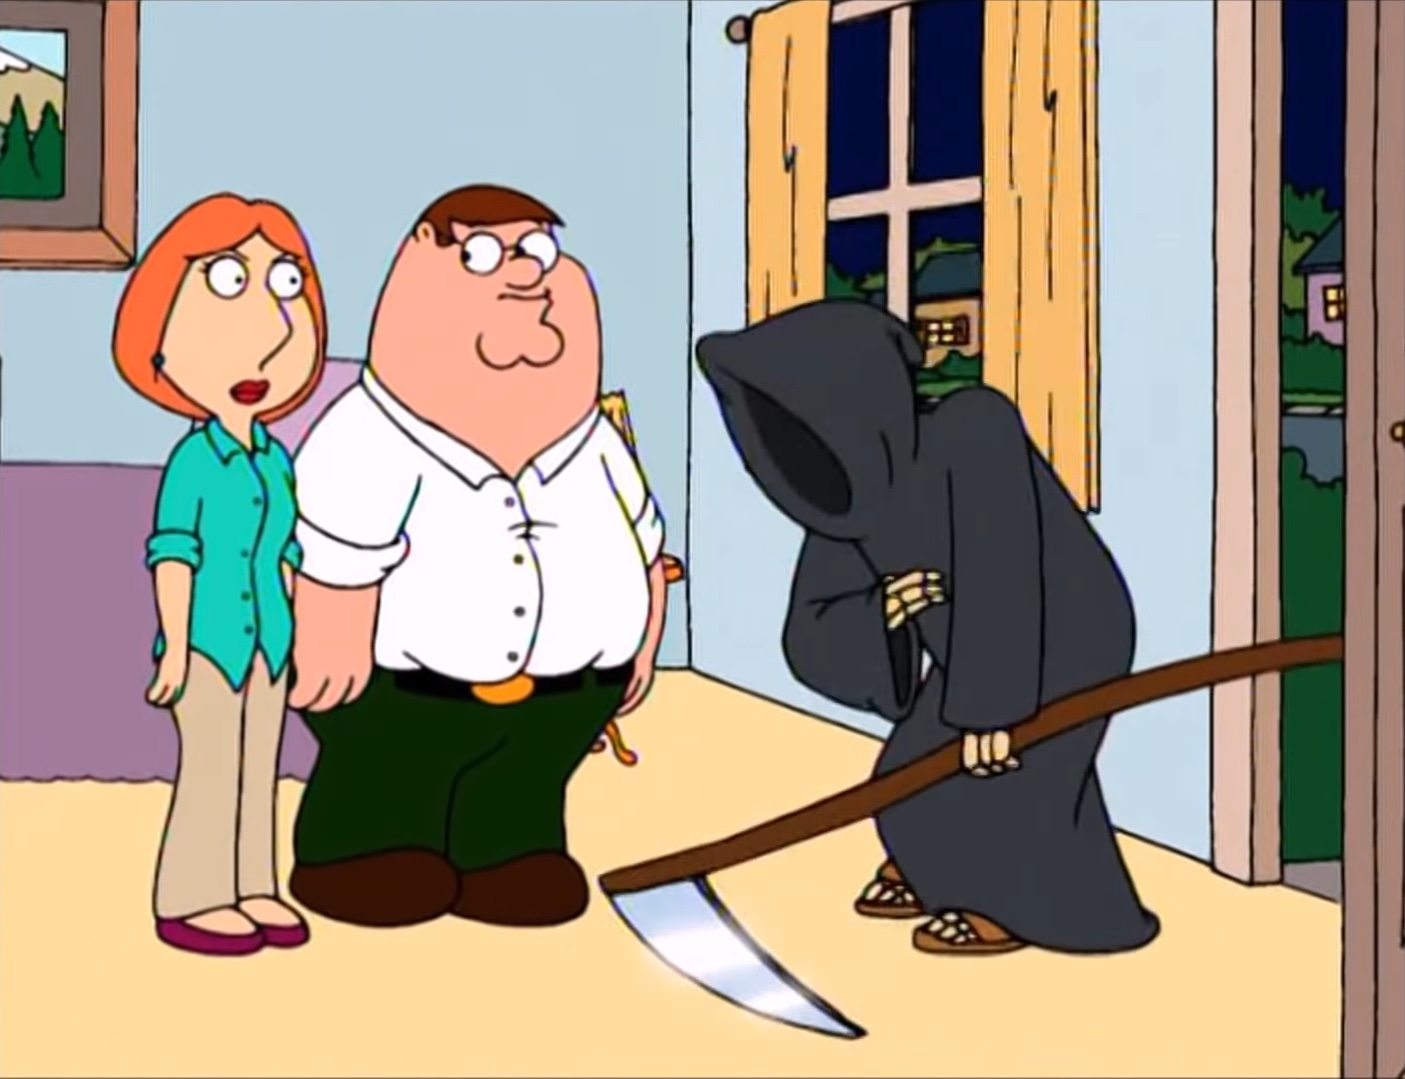 In the newest episode, Patrick literally does the Family Guy death